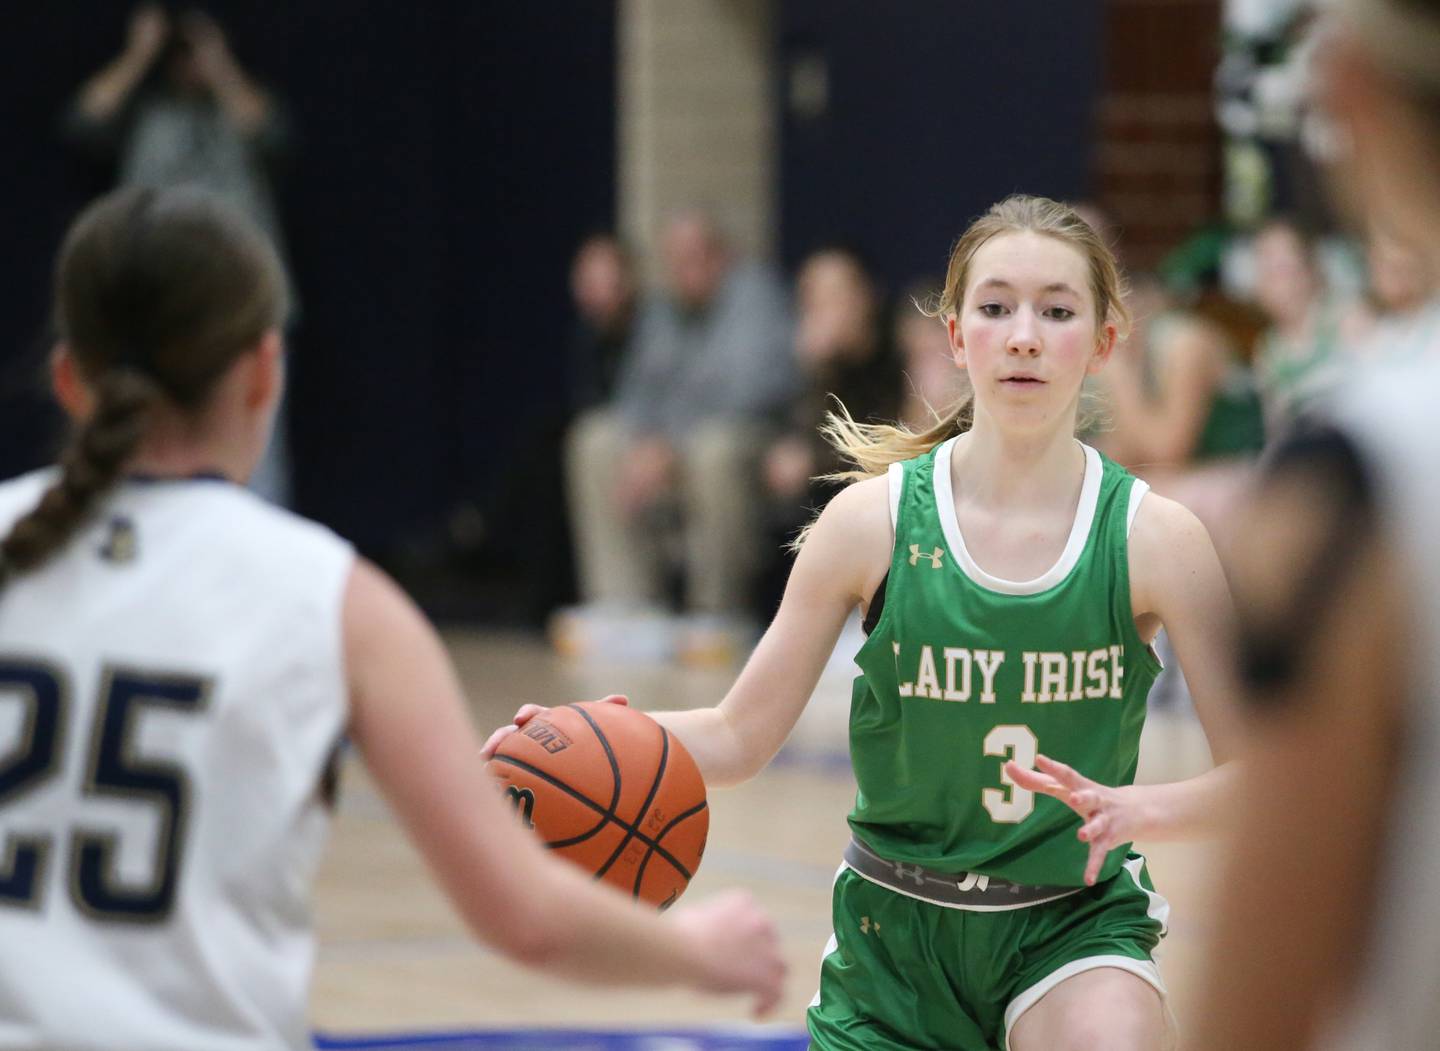 Seneca's Evelyn O'Connor dribbles the ball up the floor as Marquette's Chloe Larson defends in Bader Gym on Monday, Jan. 23, 2023 at Marquette High School.